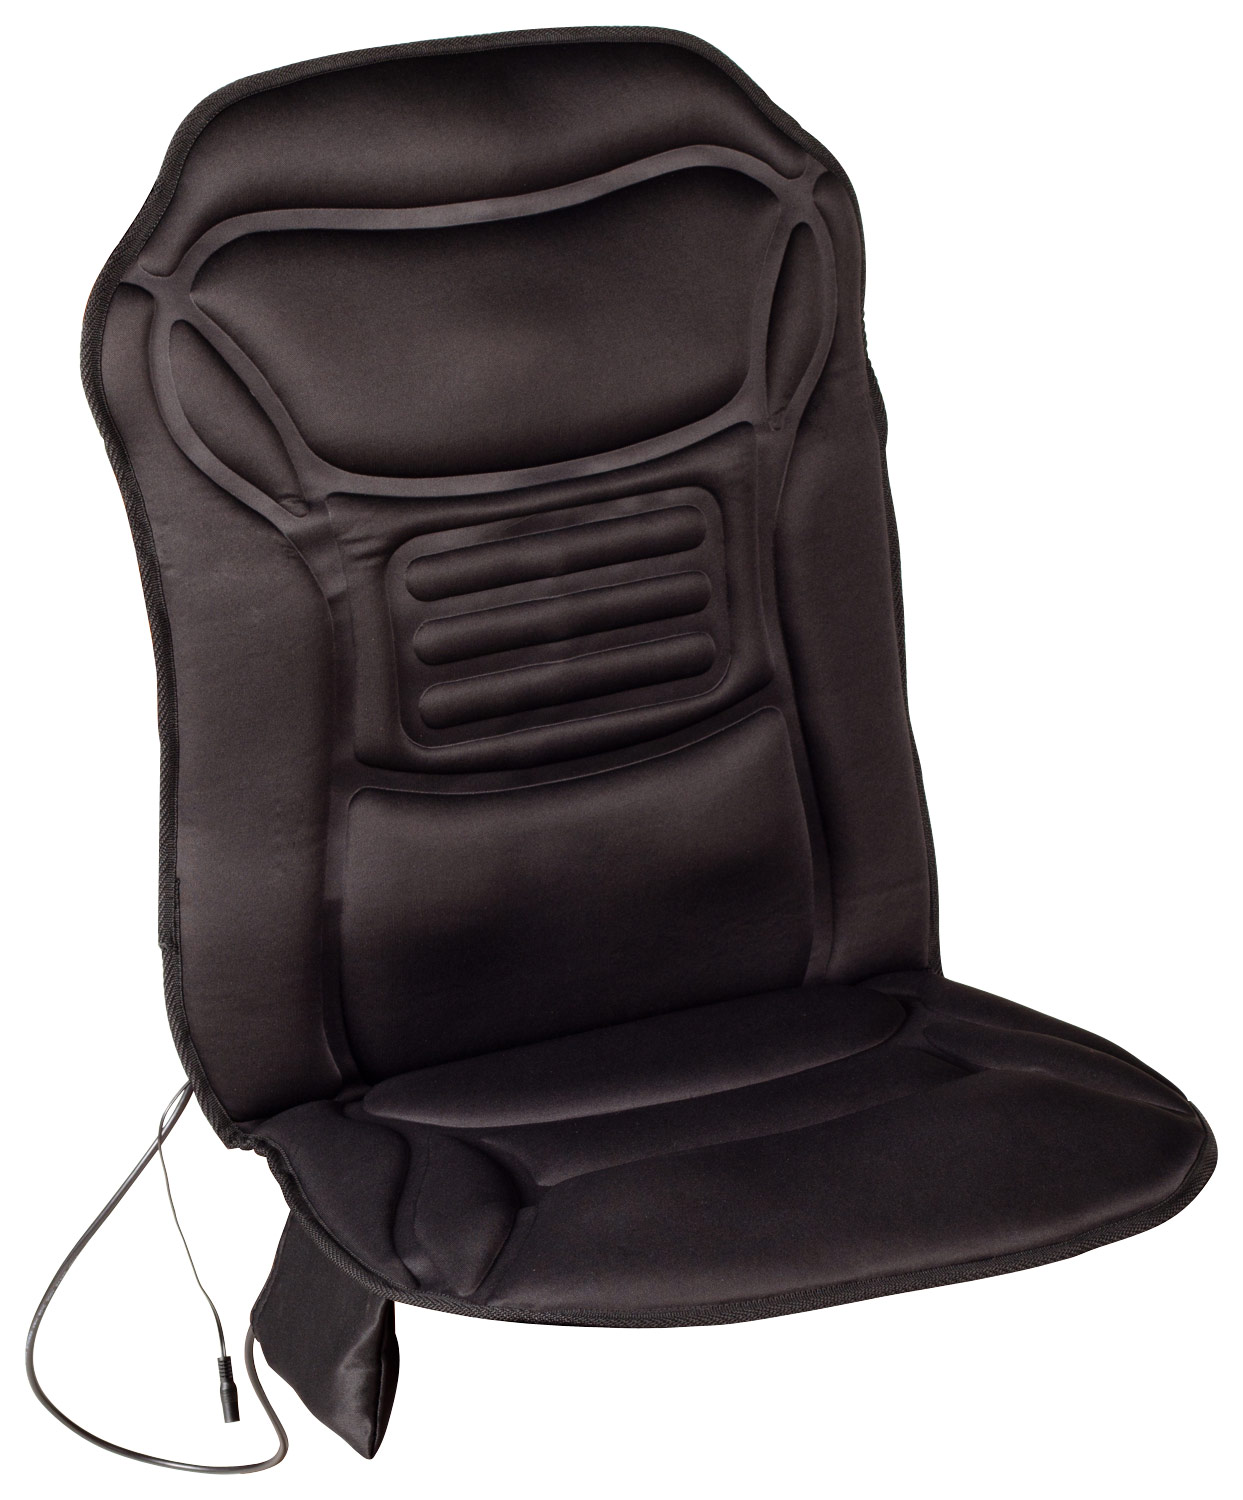 Comfort Products Inc. Heated Massage Seat Cushion  - Best Buy